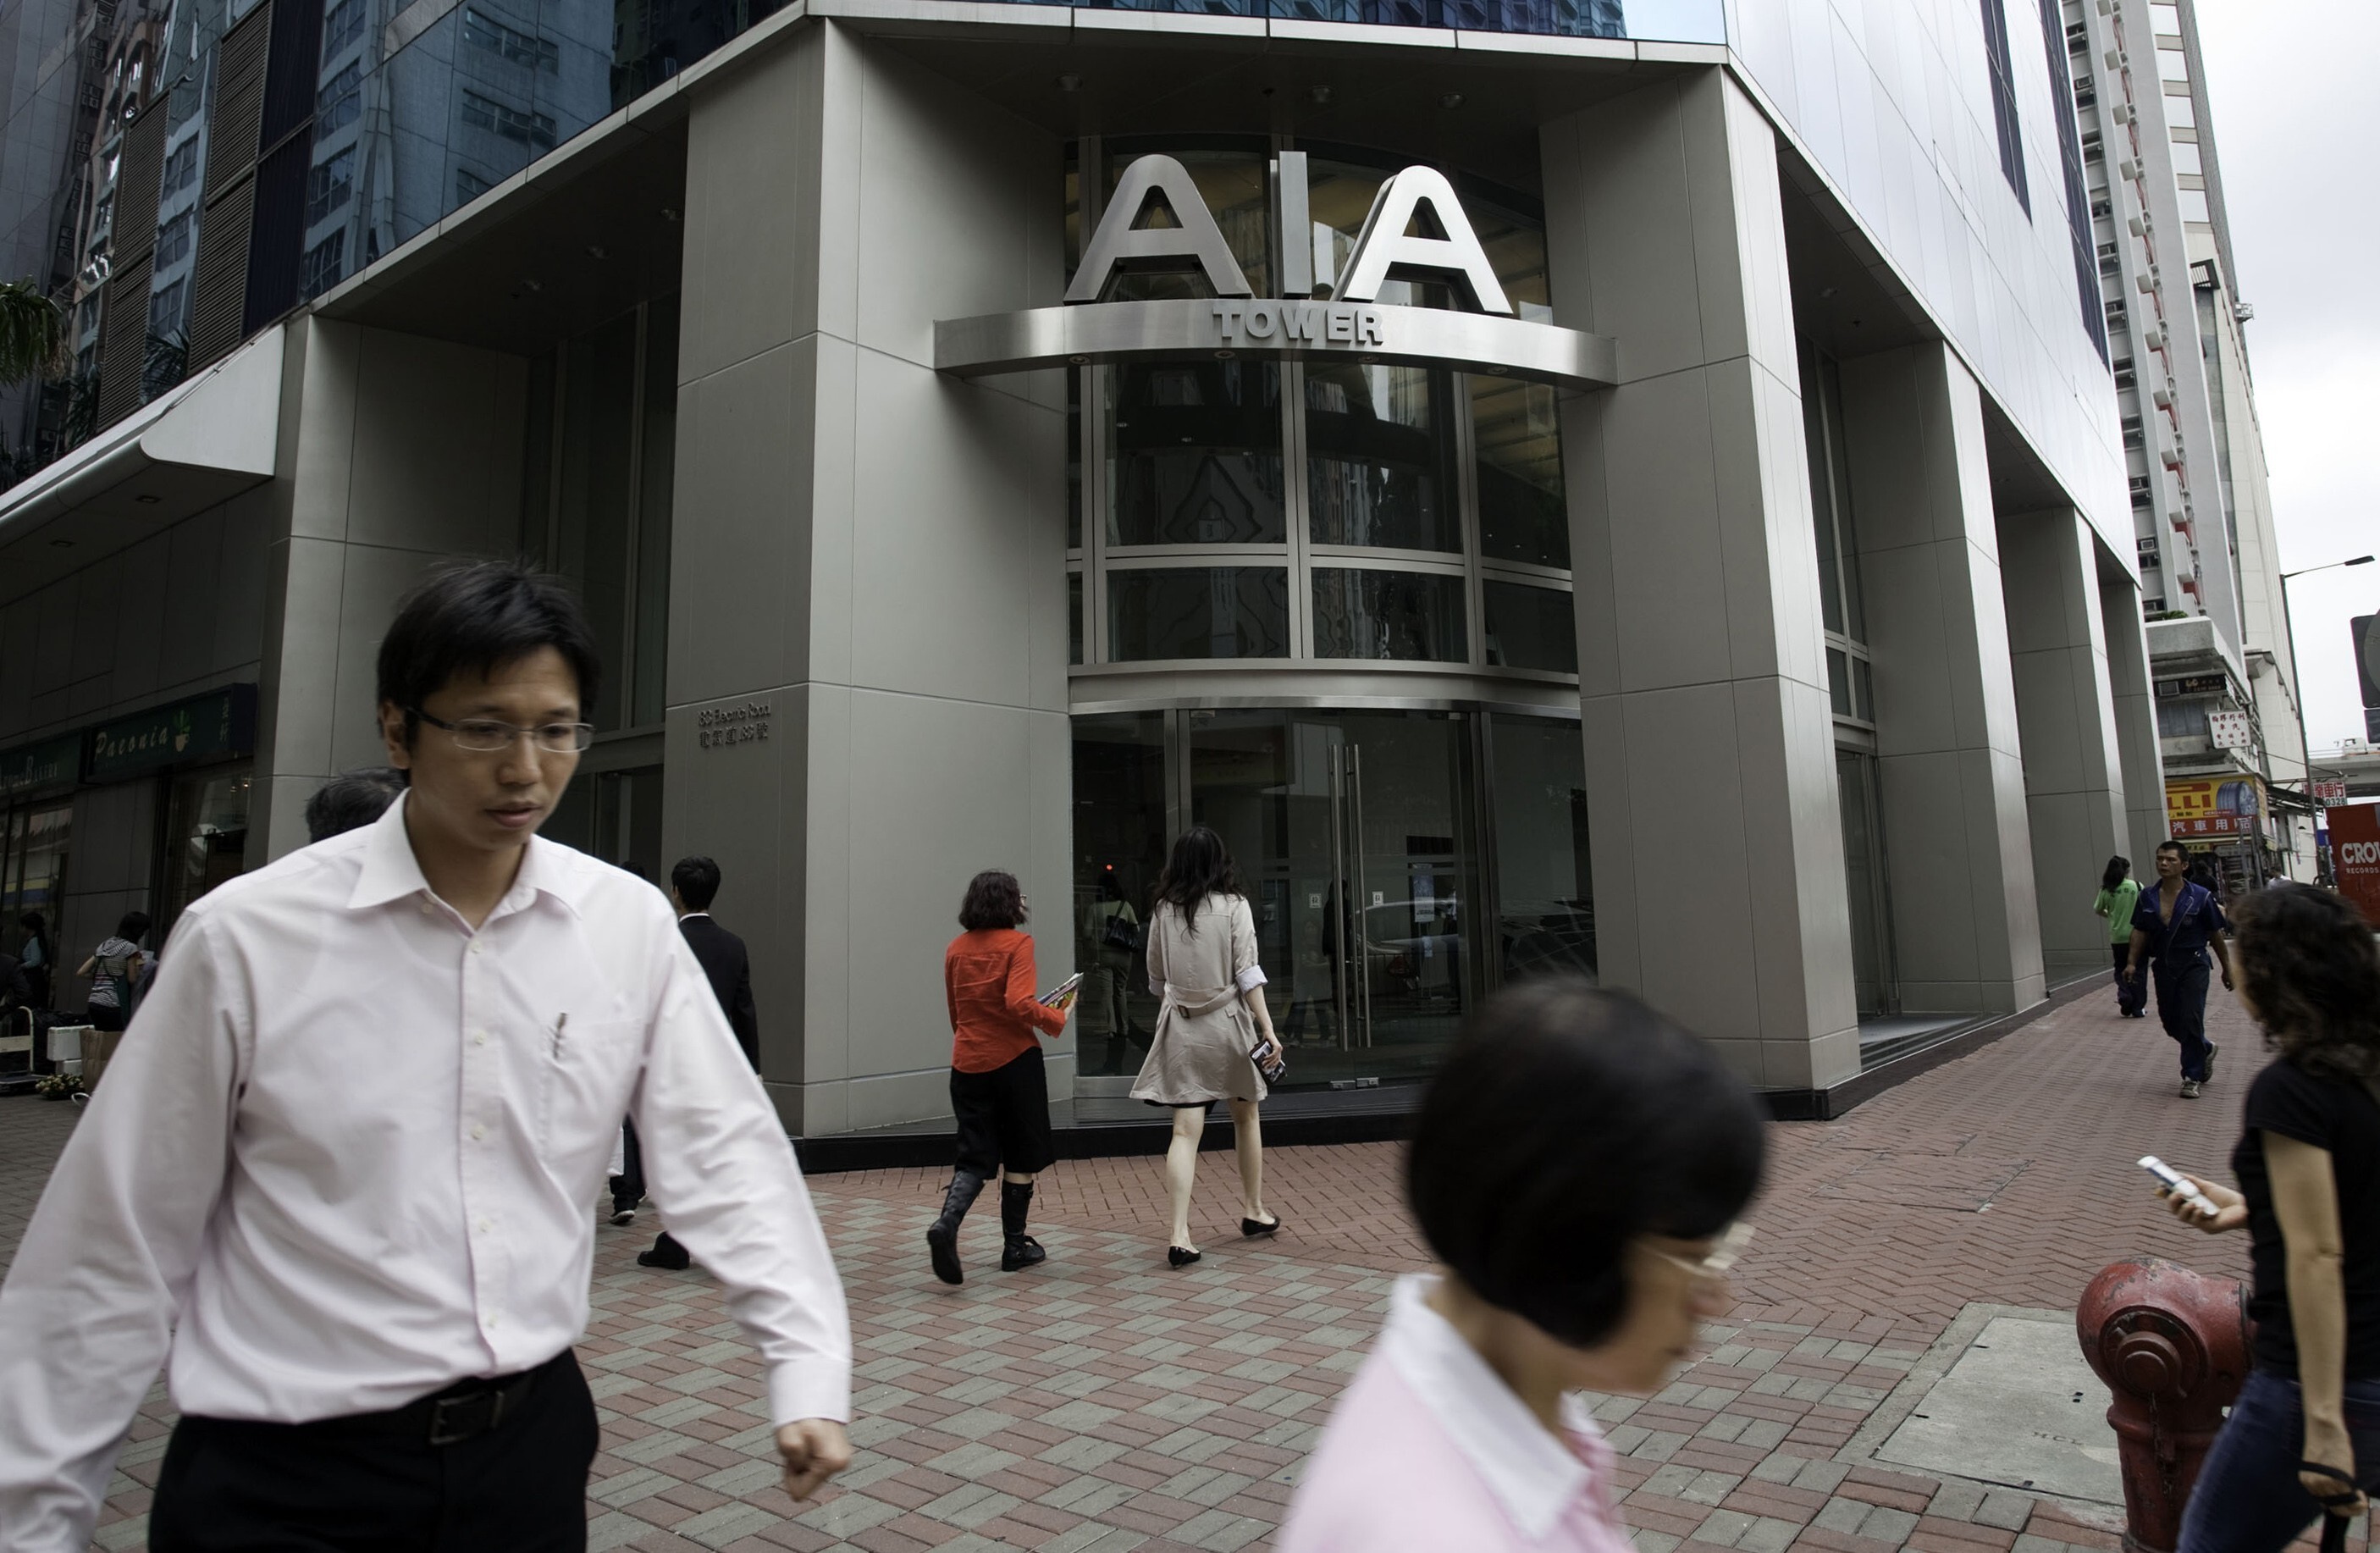 Some of Hong Kong’s biggest insurers, such as AIA and Prudential, have been recruiting extra sales agents, confident the bay area will generate new business in the long term. Photo: Bloomberg